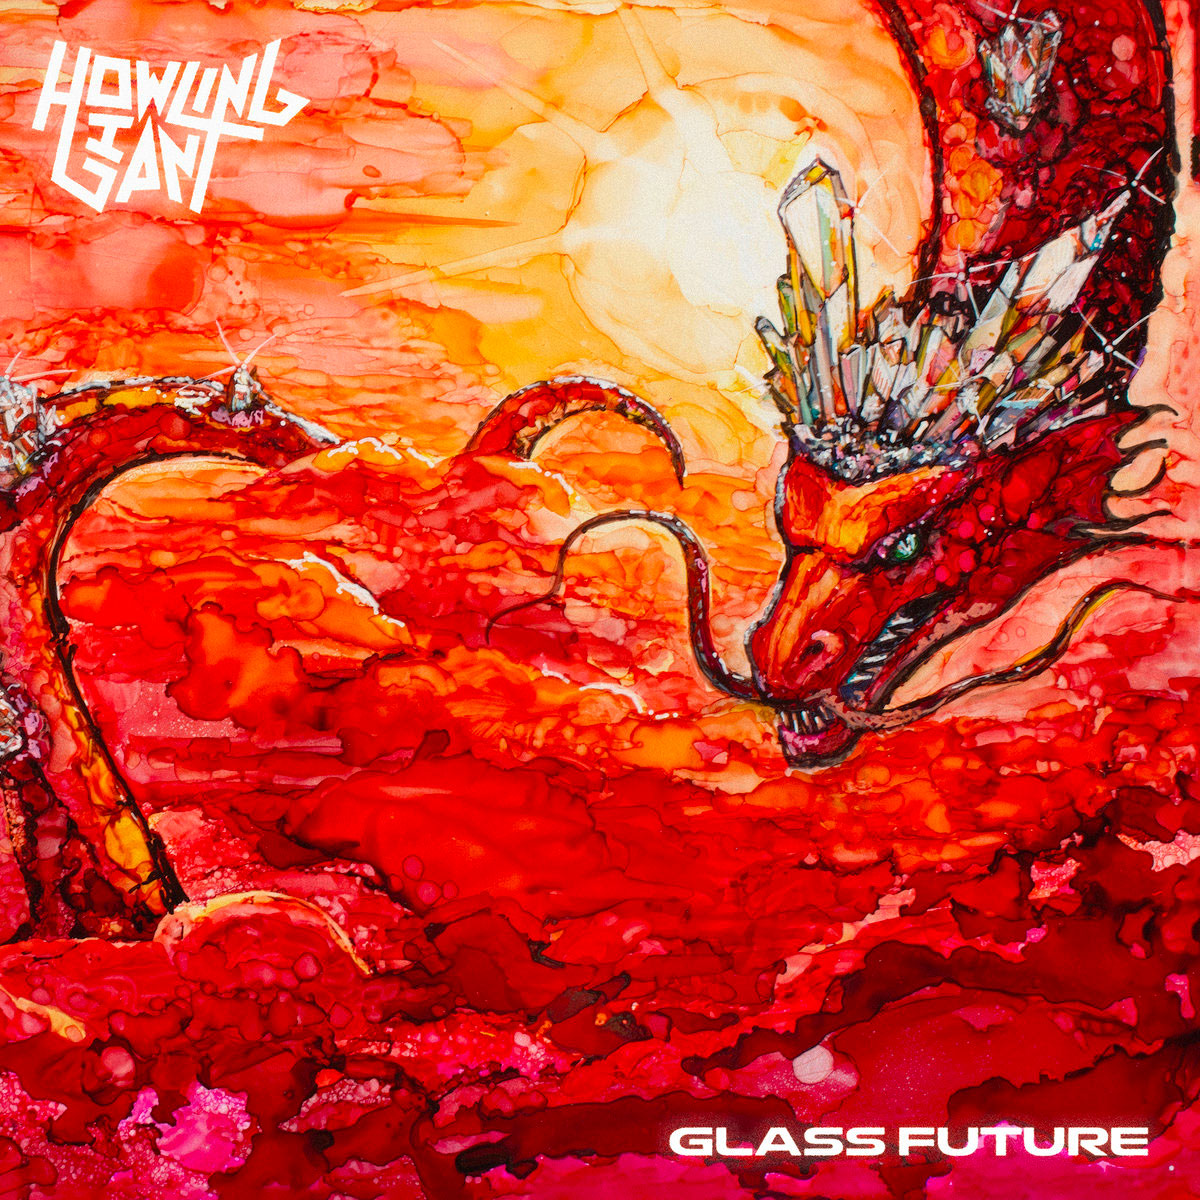 Glass Future by Howling Giant